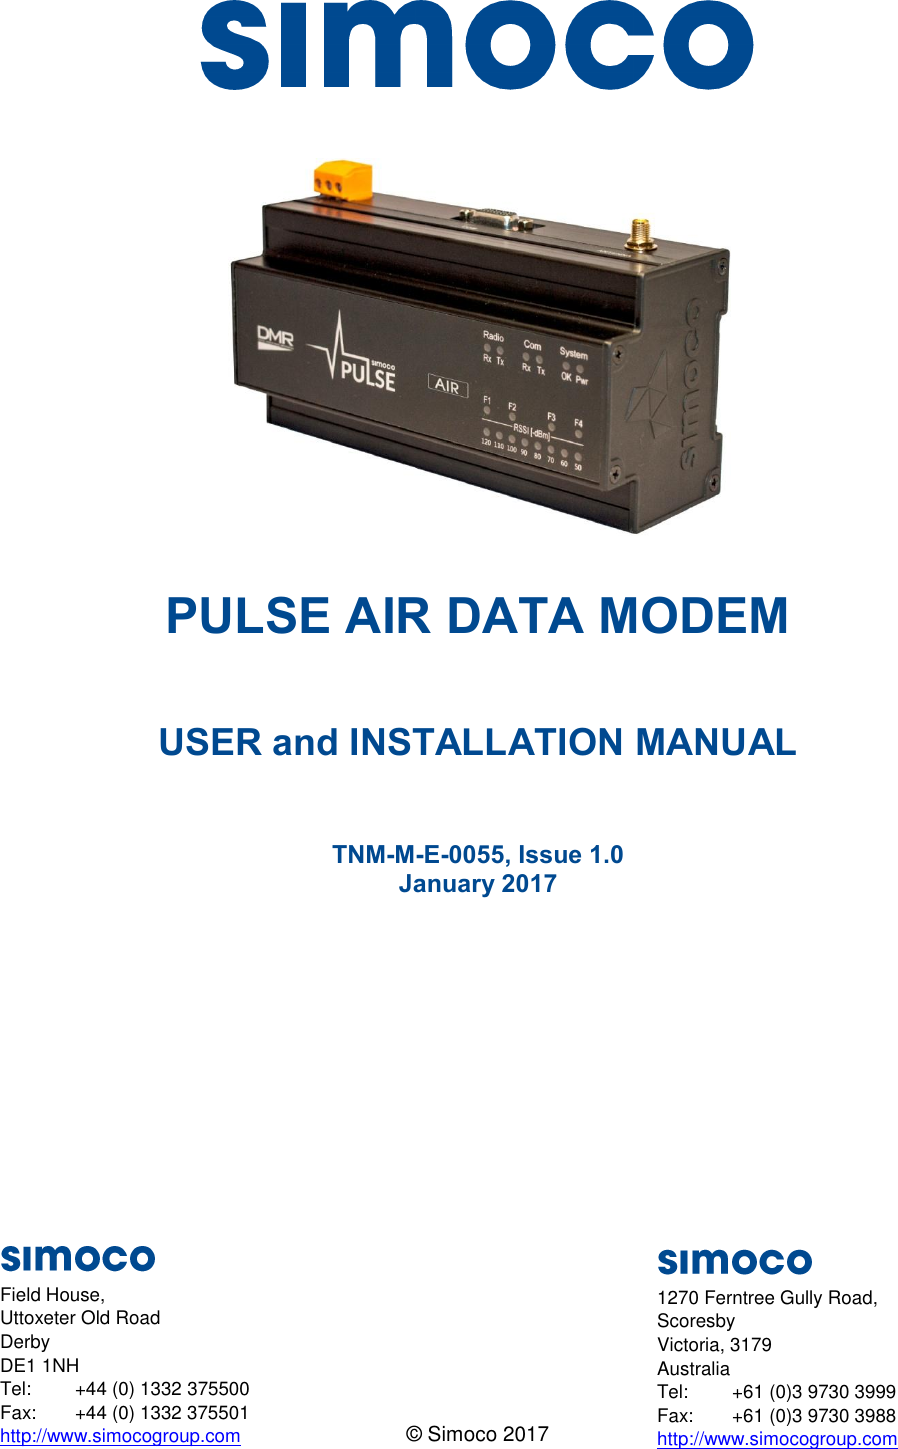     PULSE AIR DATA MODEM  USER and INSTALLATION MANUAL  TNM-M-E-0055, Issue 1.0 January 2017     © Simoco 2017  Field House, Uttoxeter Old Road Derby DE1 1NH Tel:  +44 (0) 1332 375500 Fax:  +44 (0) 1332 375501 http://www.simocogroup.com 1270 Ferntree Gully Road, Scoresby Victoria, 3179 Australia Tel:  +61 (0)3 9730 3999 Fax:  +61 (0)3 9730 3988 http://www.simocogroup.com 